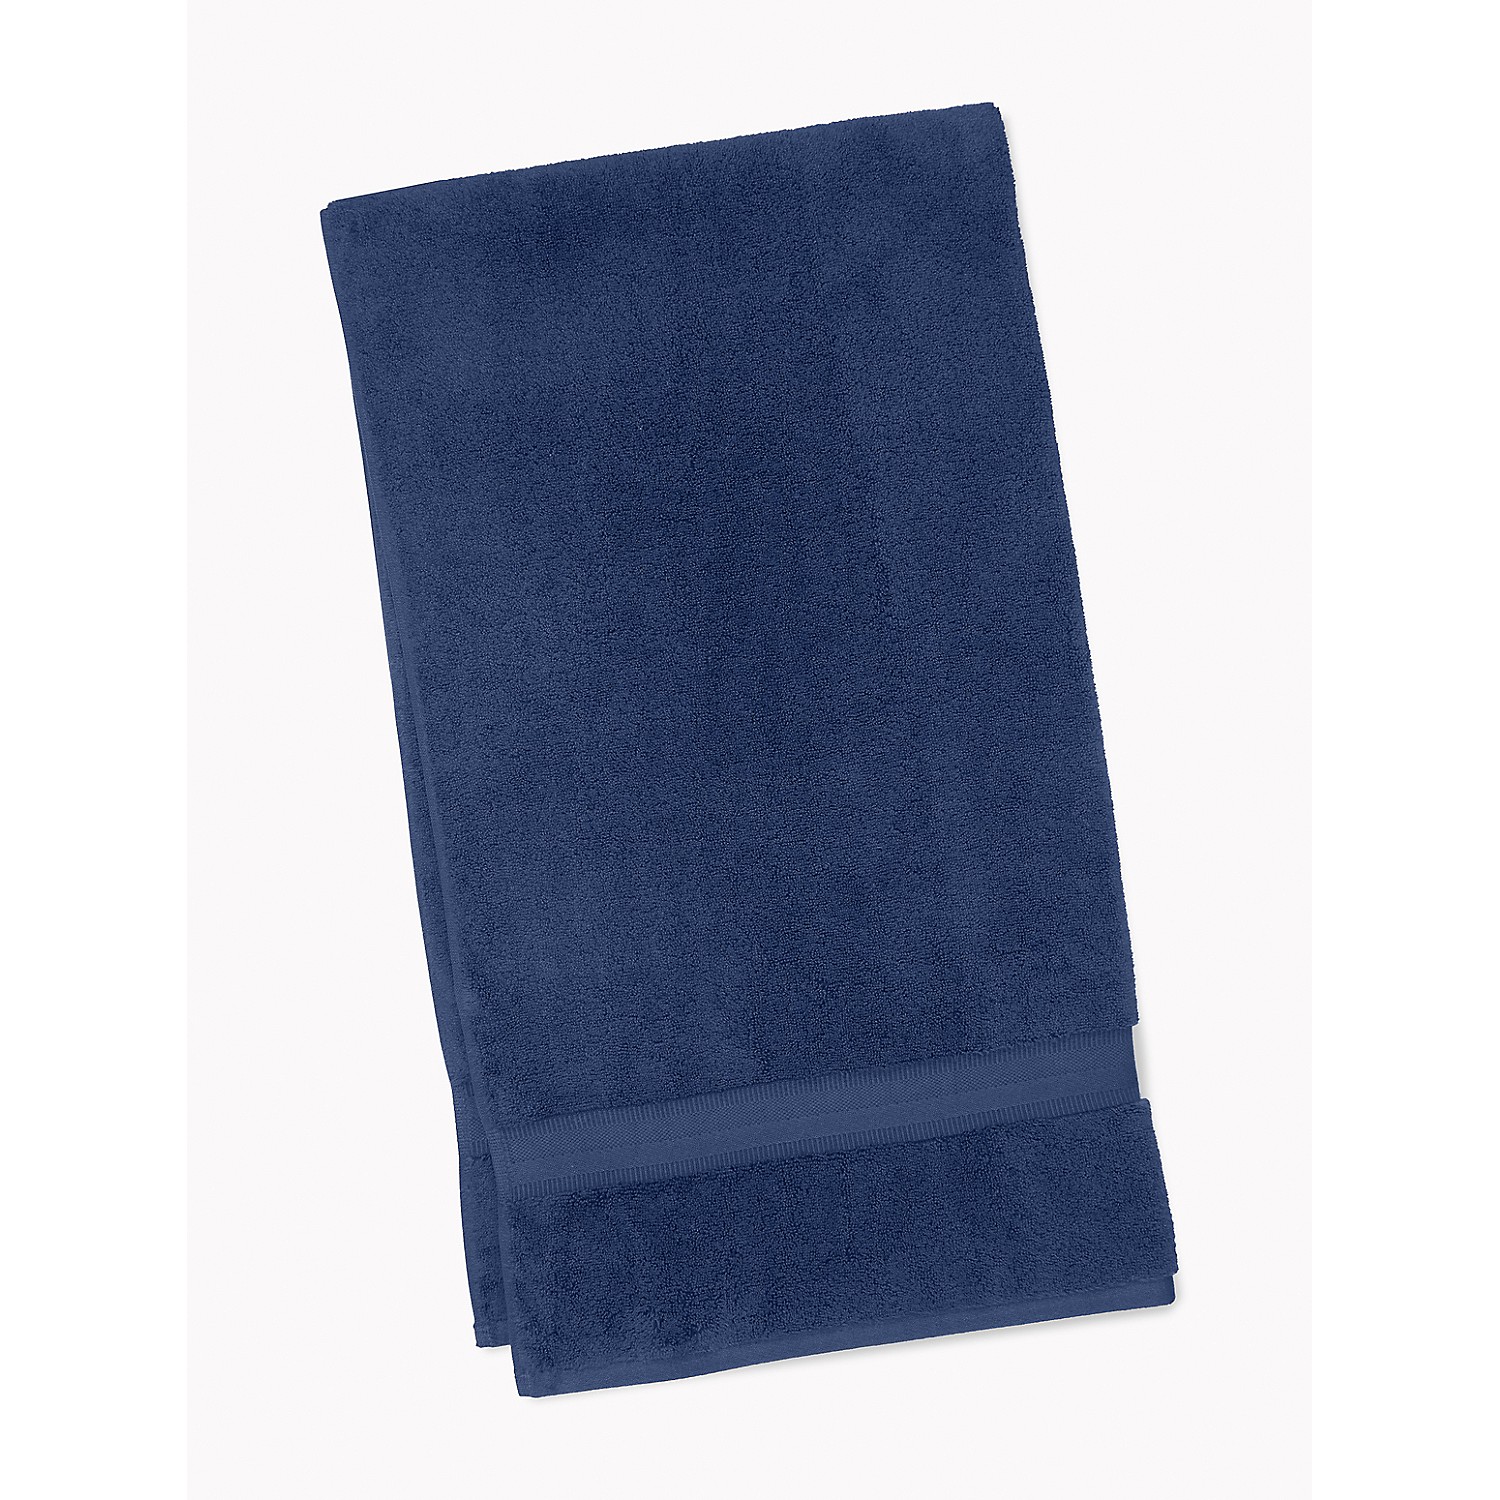 TOMMY HILFIGER Signature Solid Bath Towel in Medieval Blue